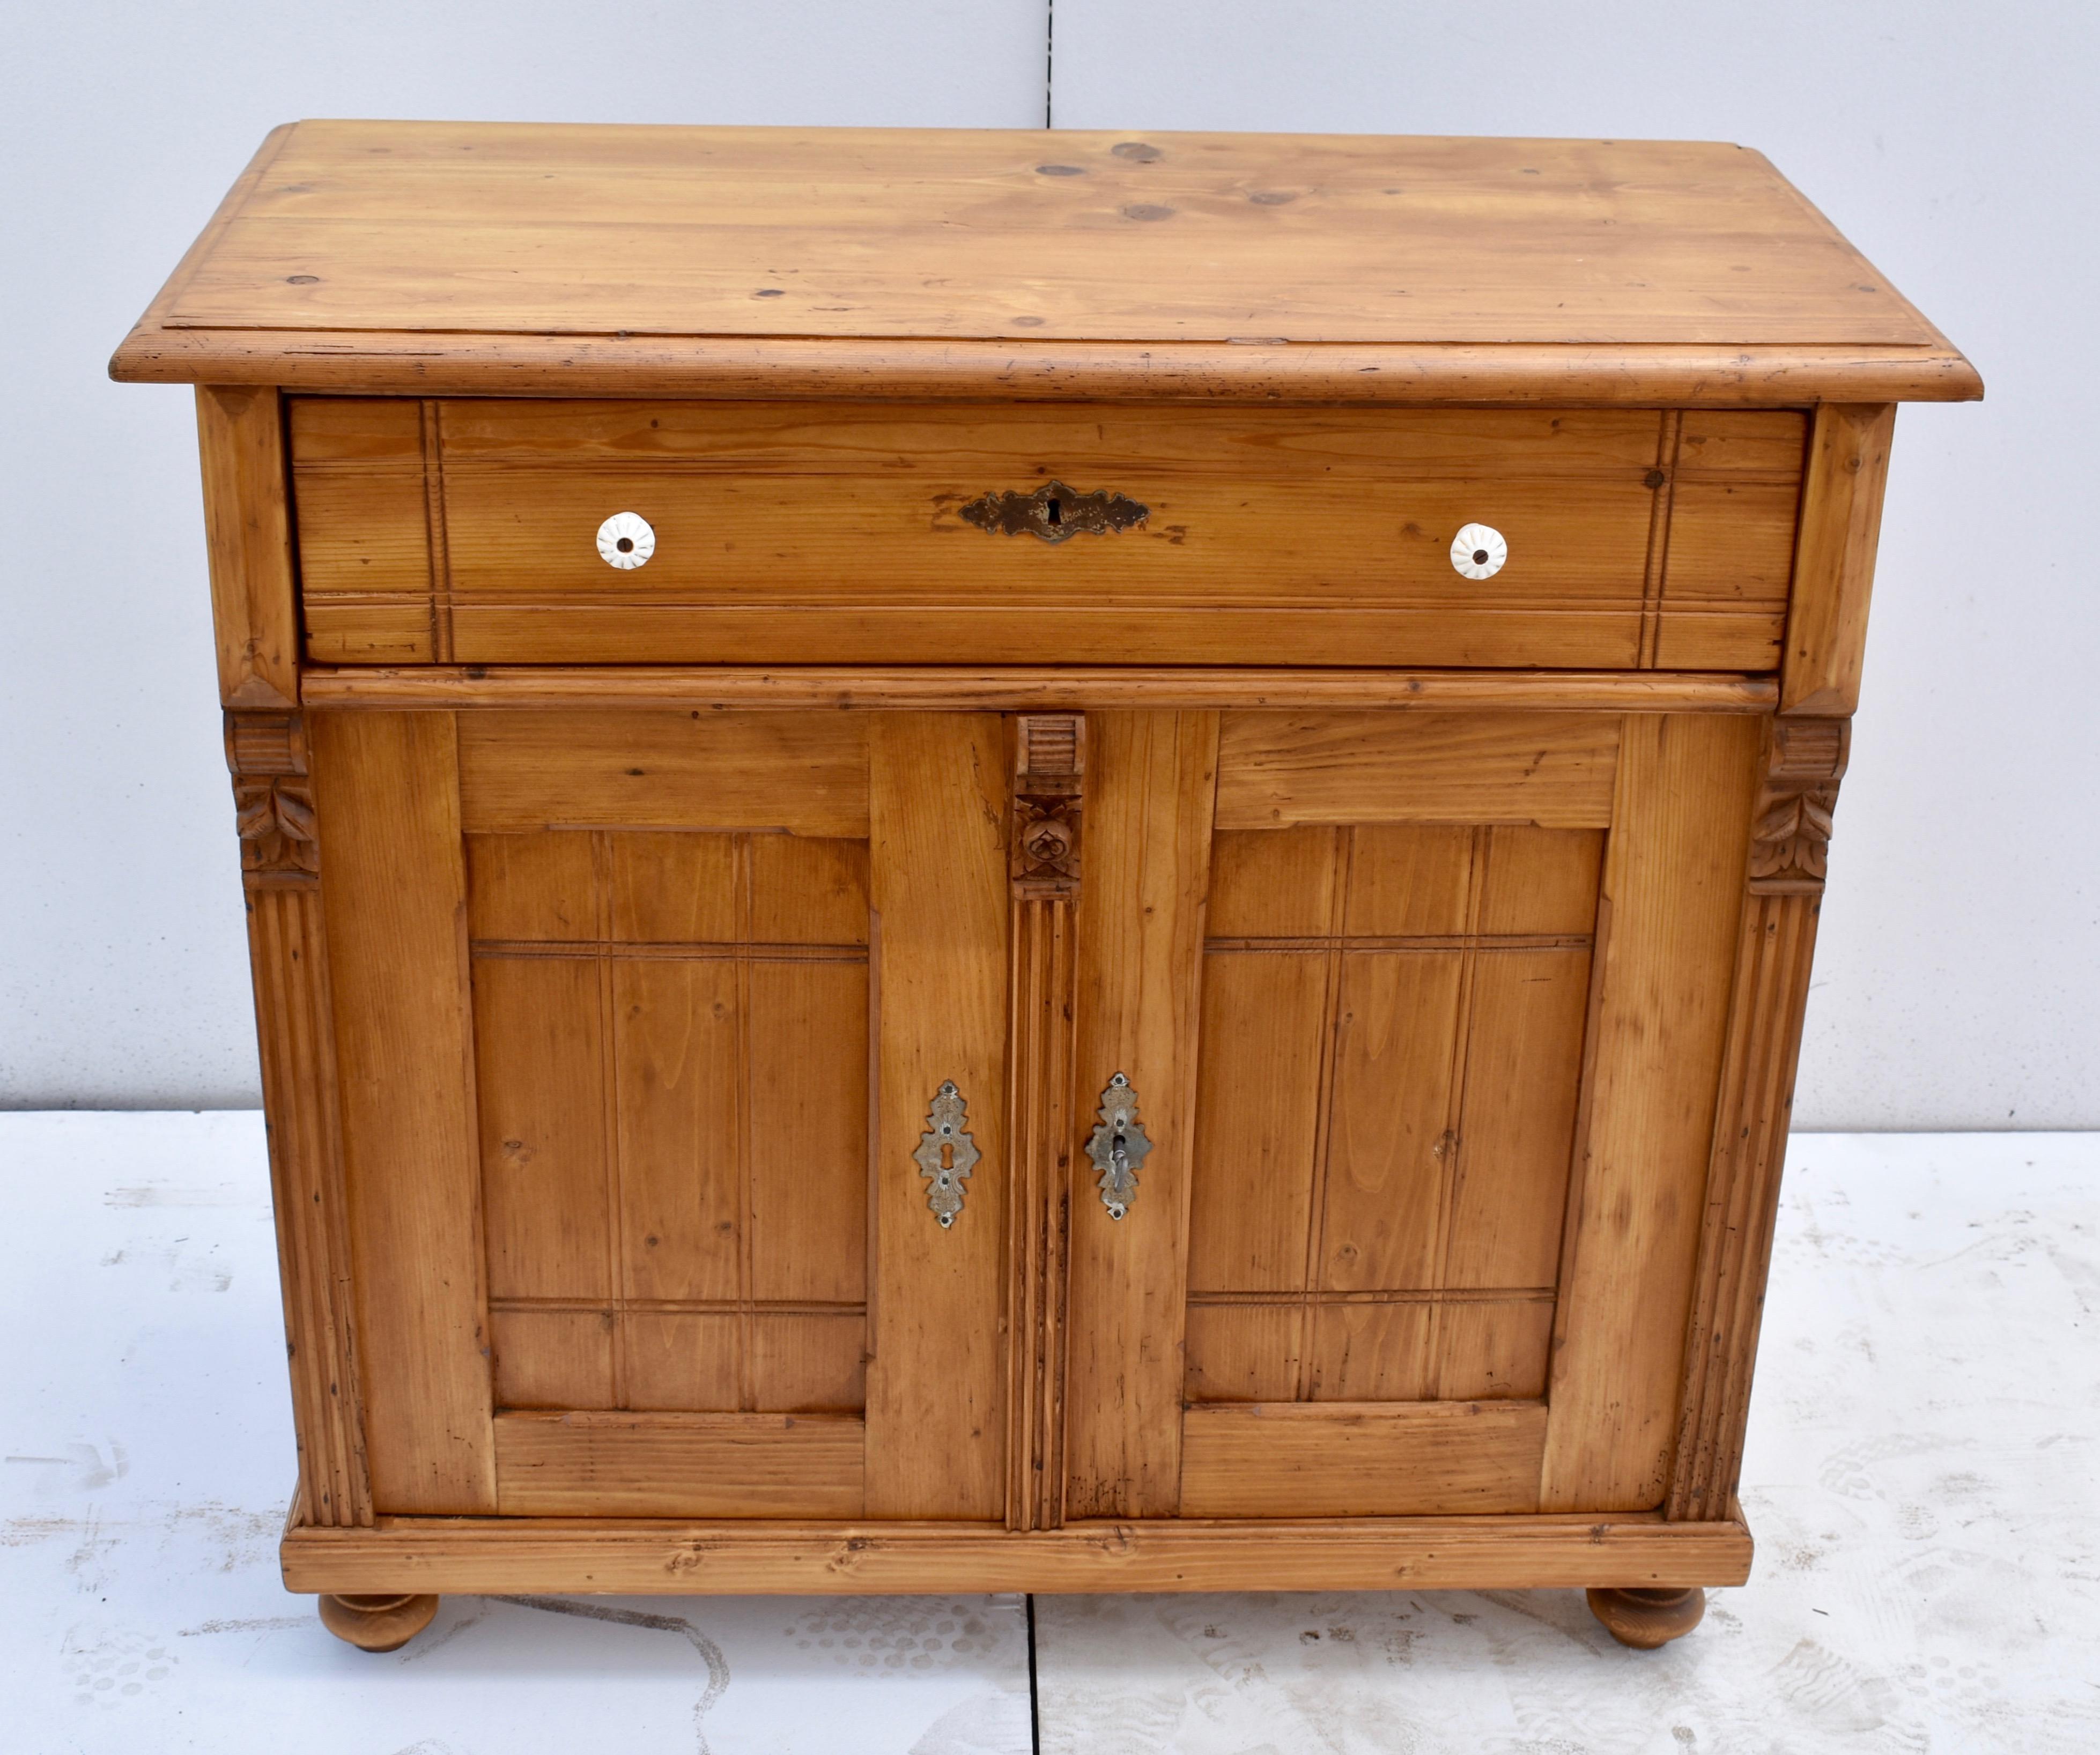 This pretty little two door base has some interesting and unusual features. The top has a step-down edge and sits above a single long hand-cut dovetailed drawer. The drawer front bears a double row of criss-crossed incisions, a design that is